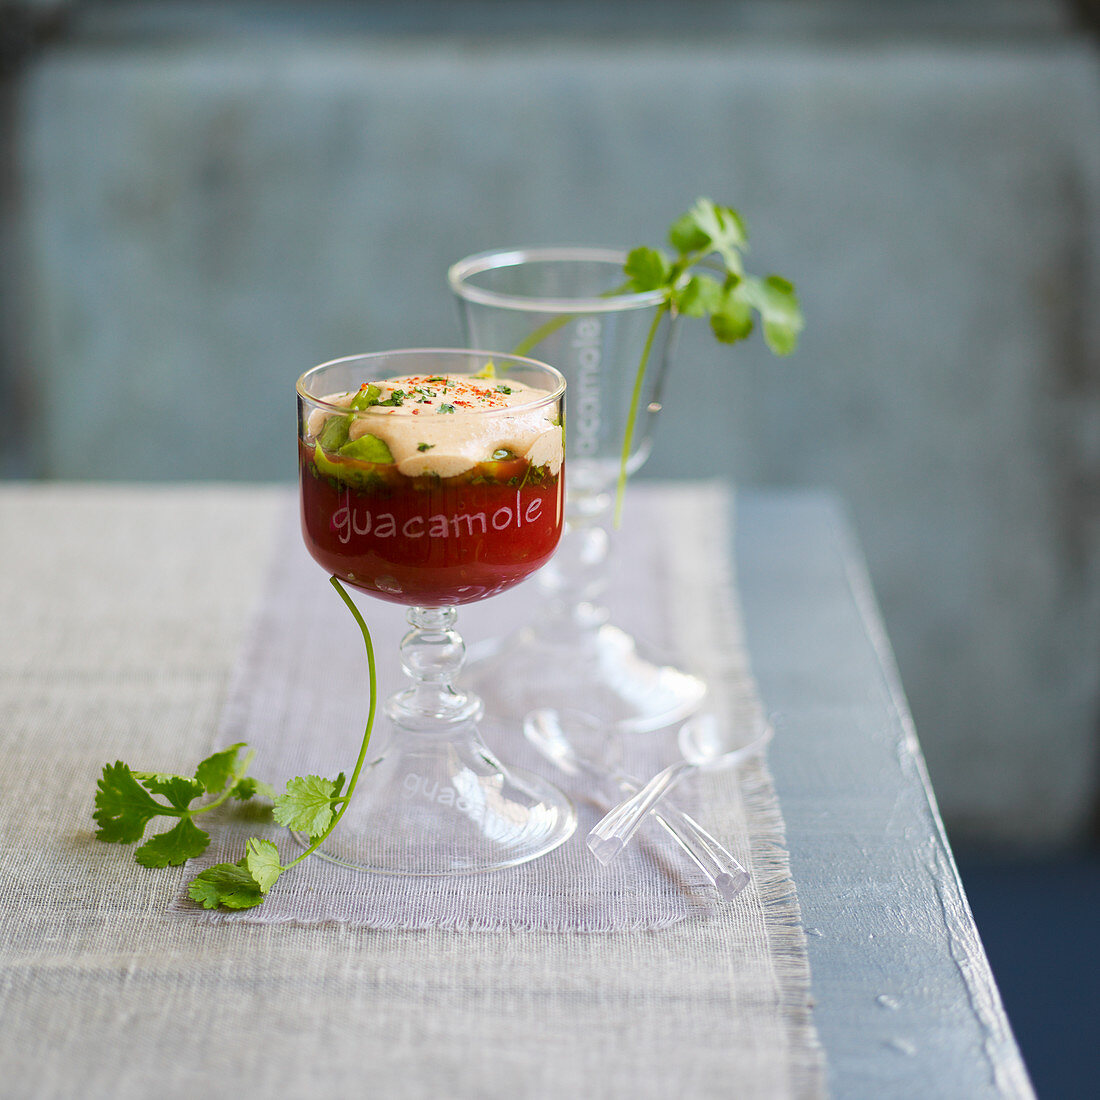 Tabasco mousse with guacamole